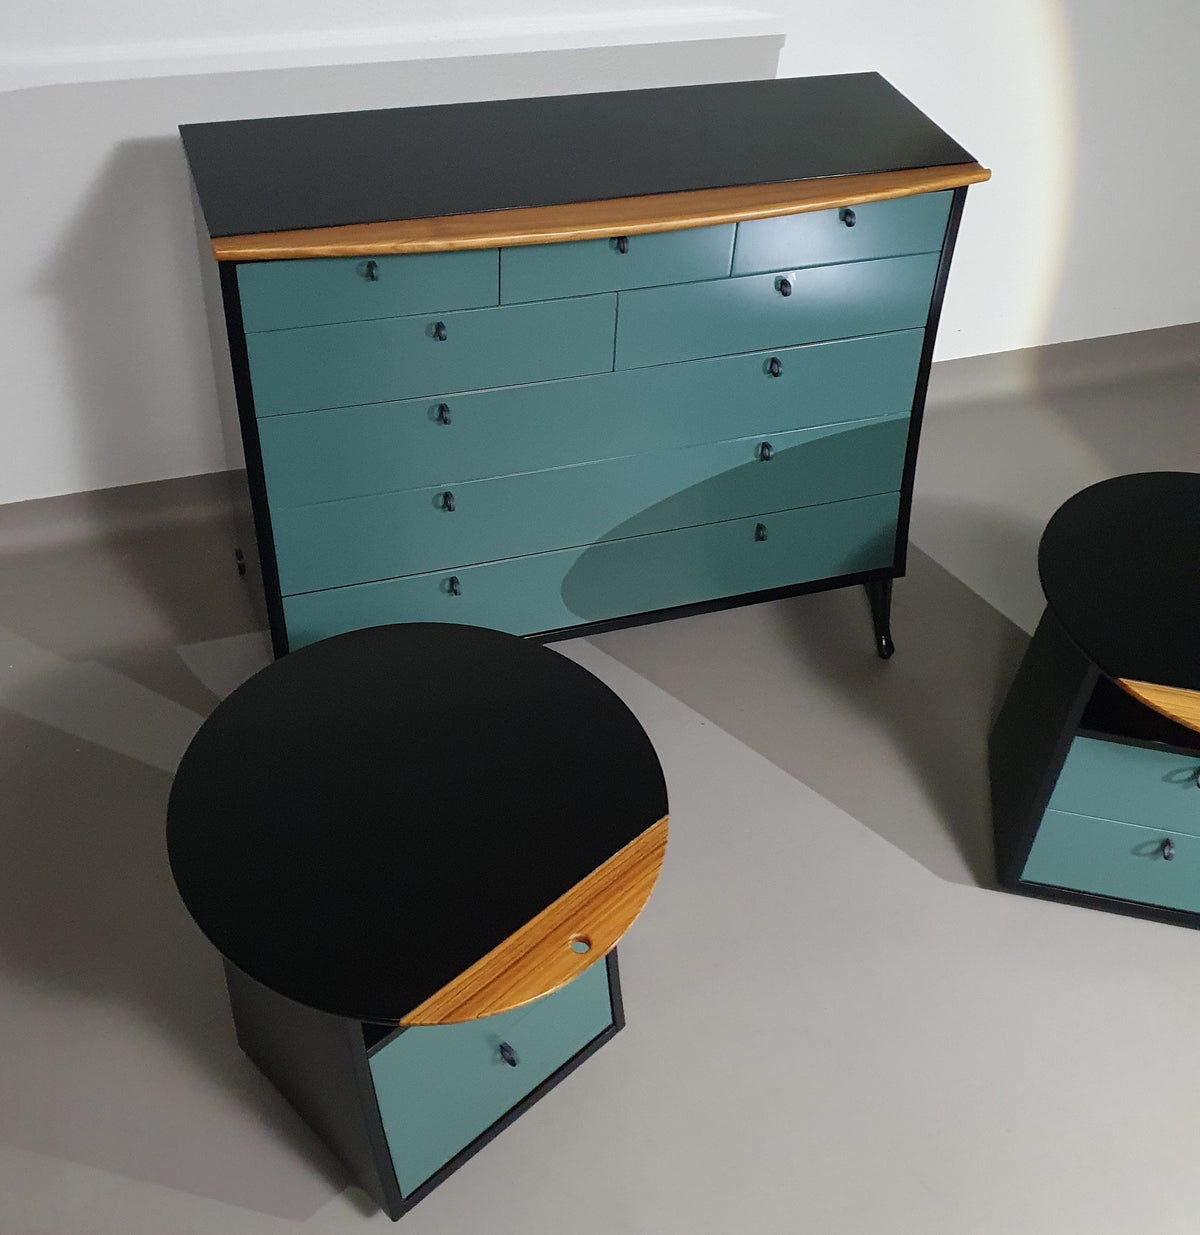 Giorgetti set 1990 by Umberto Asnago
Bed sidetables / sidetables / sideboard with drawers.